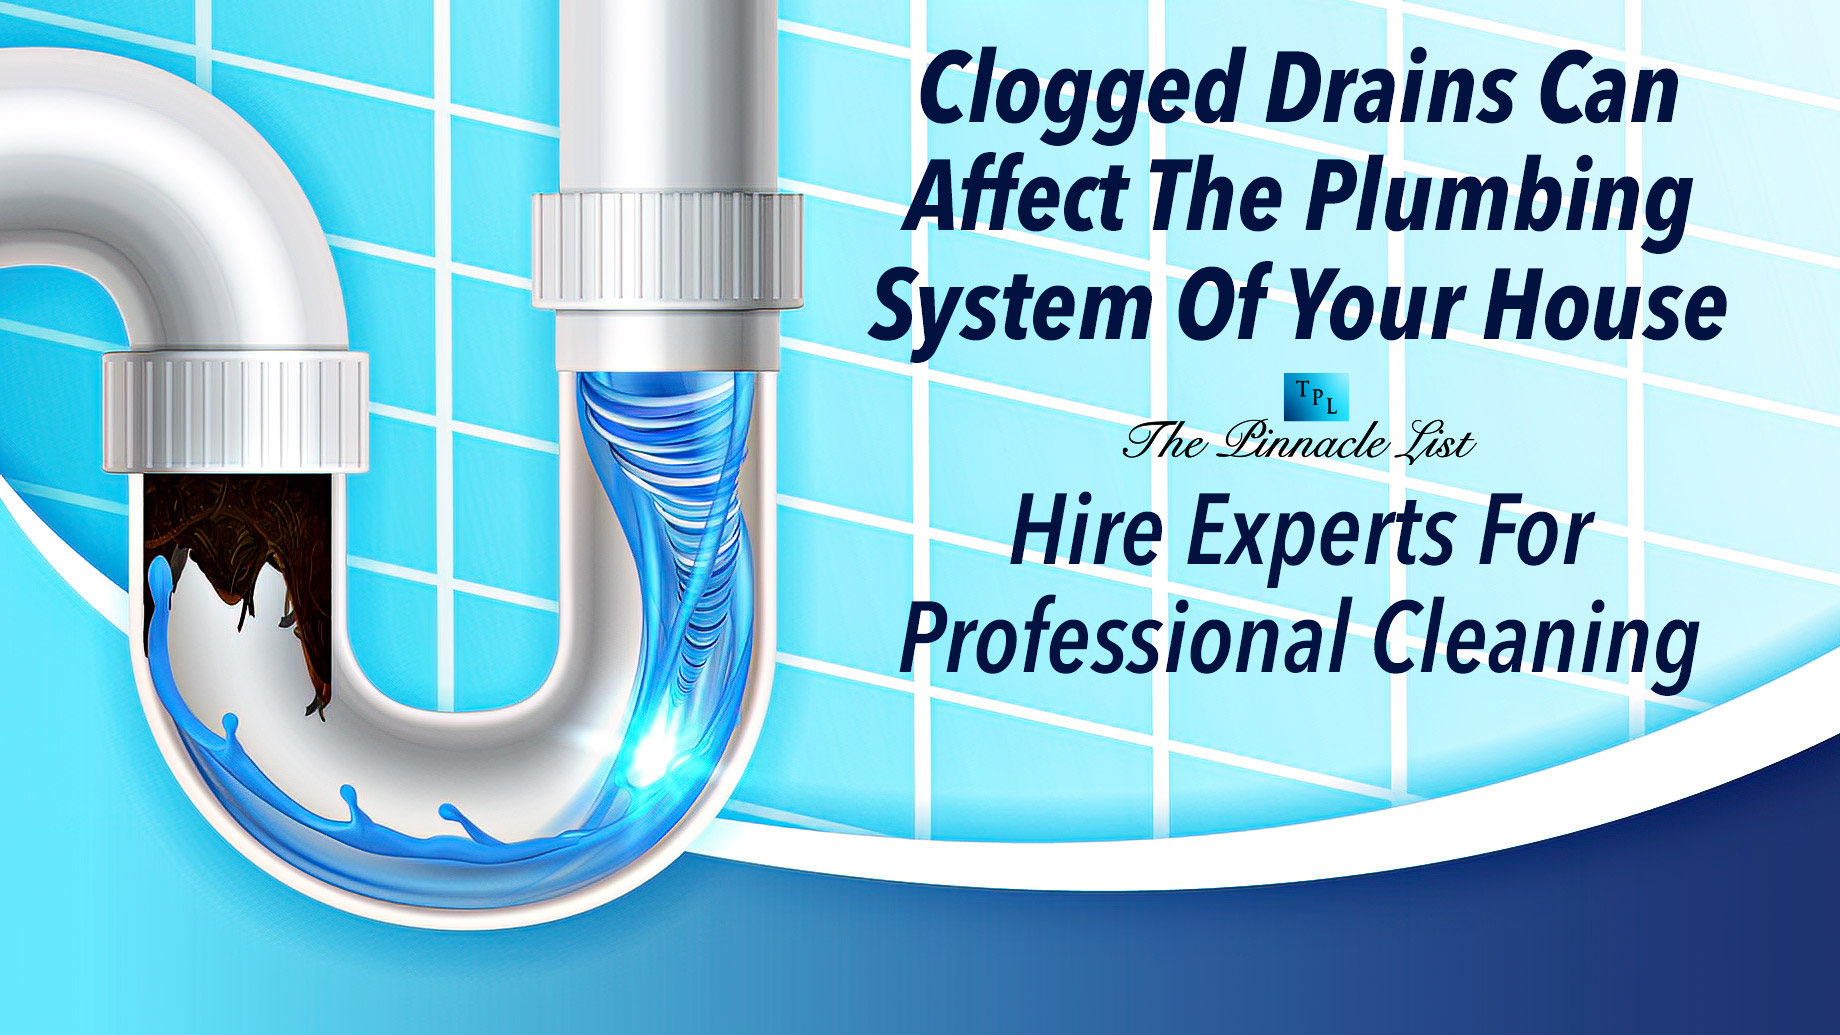 Clogged Drains Can Affect The Plumbing System Of Your House - Hire Experts For Professional Cleaning